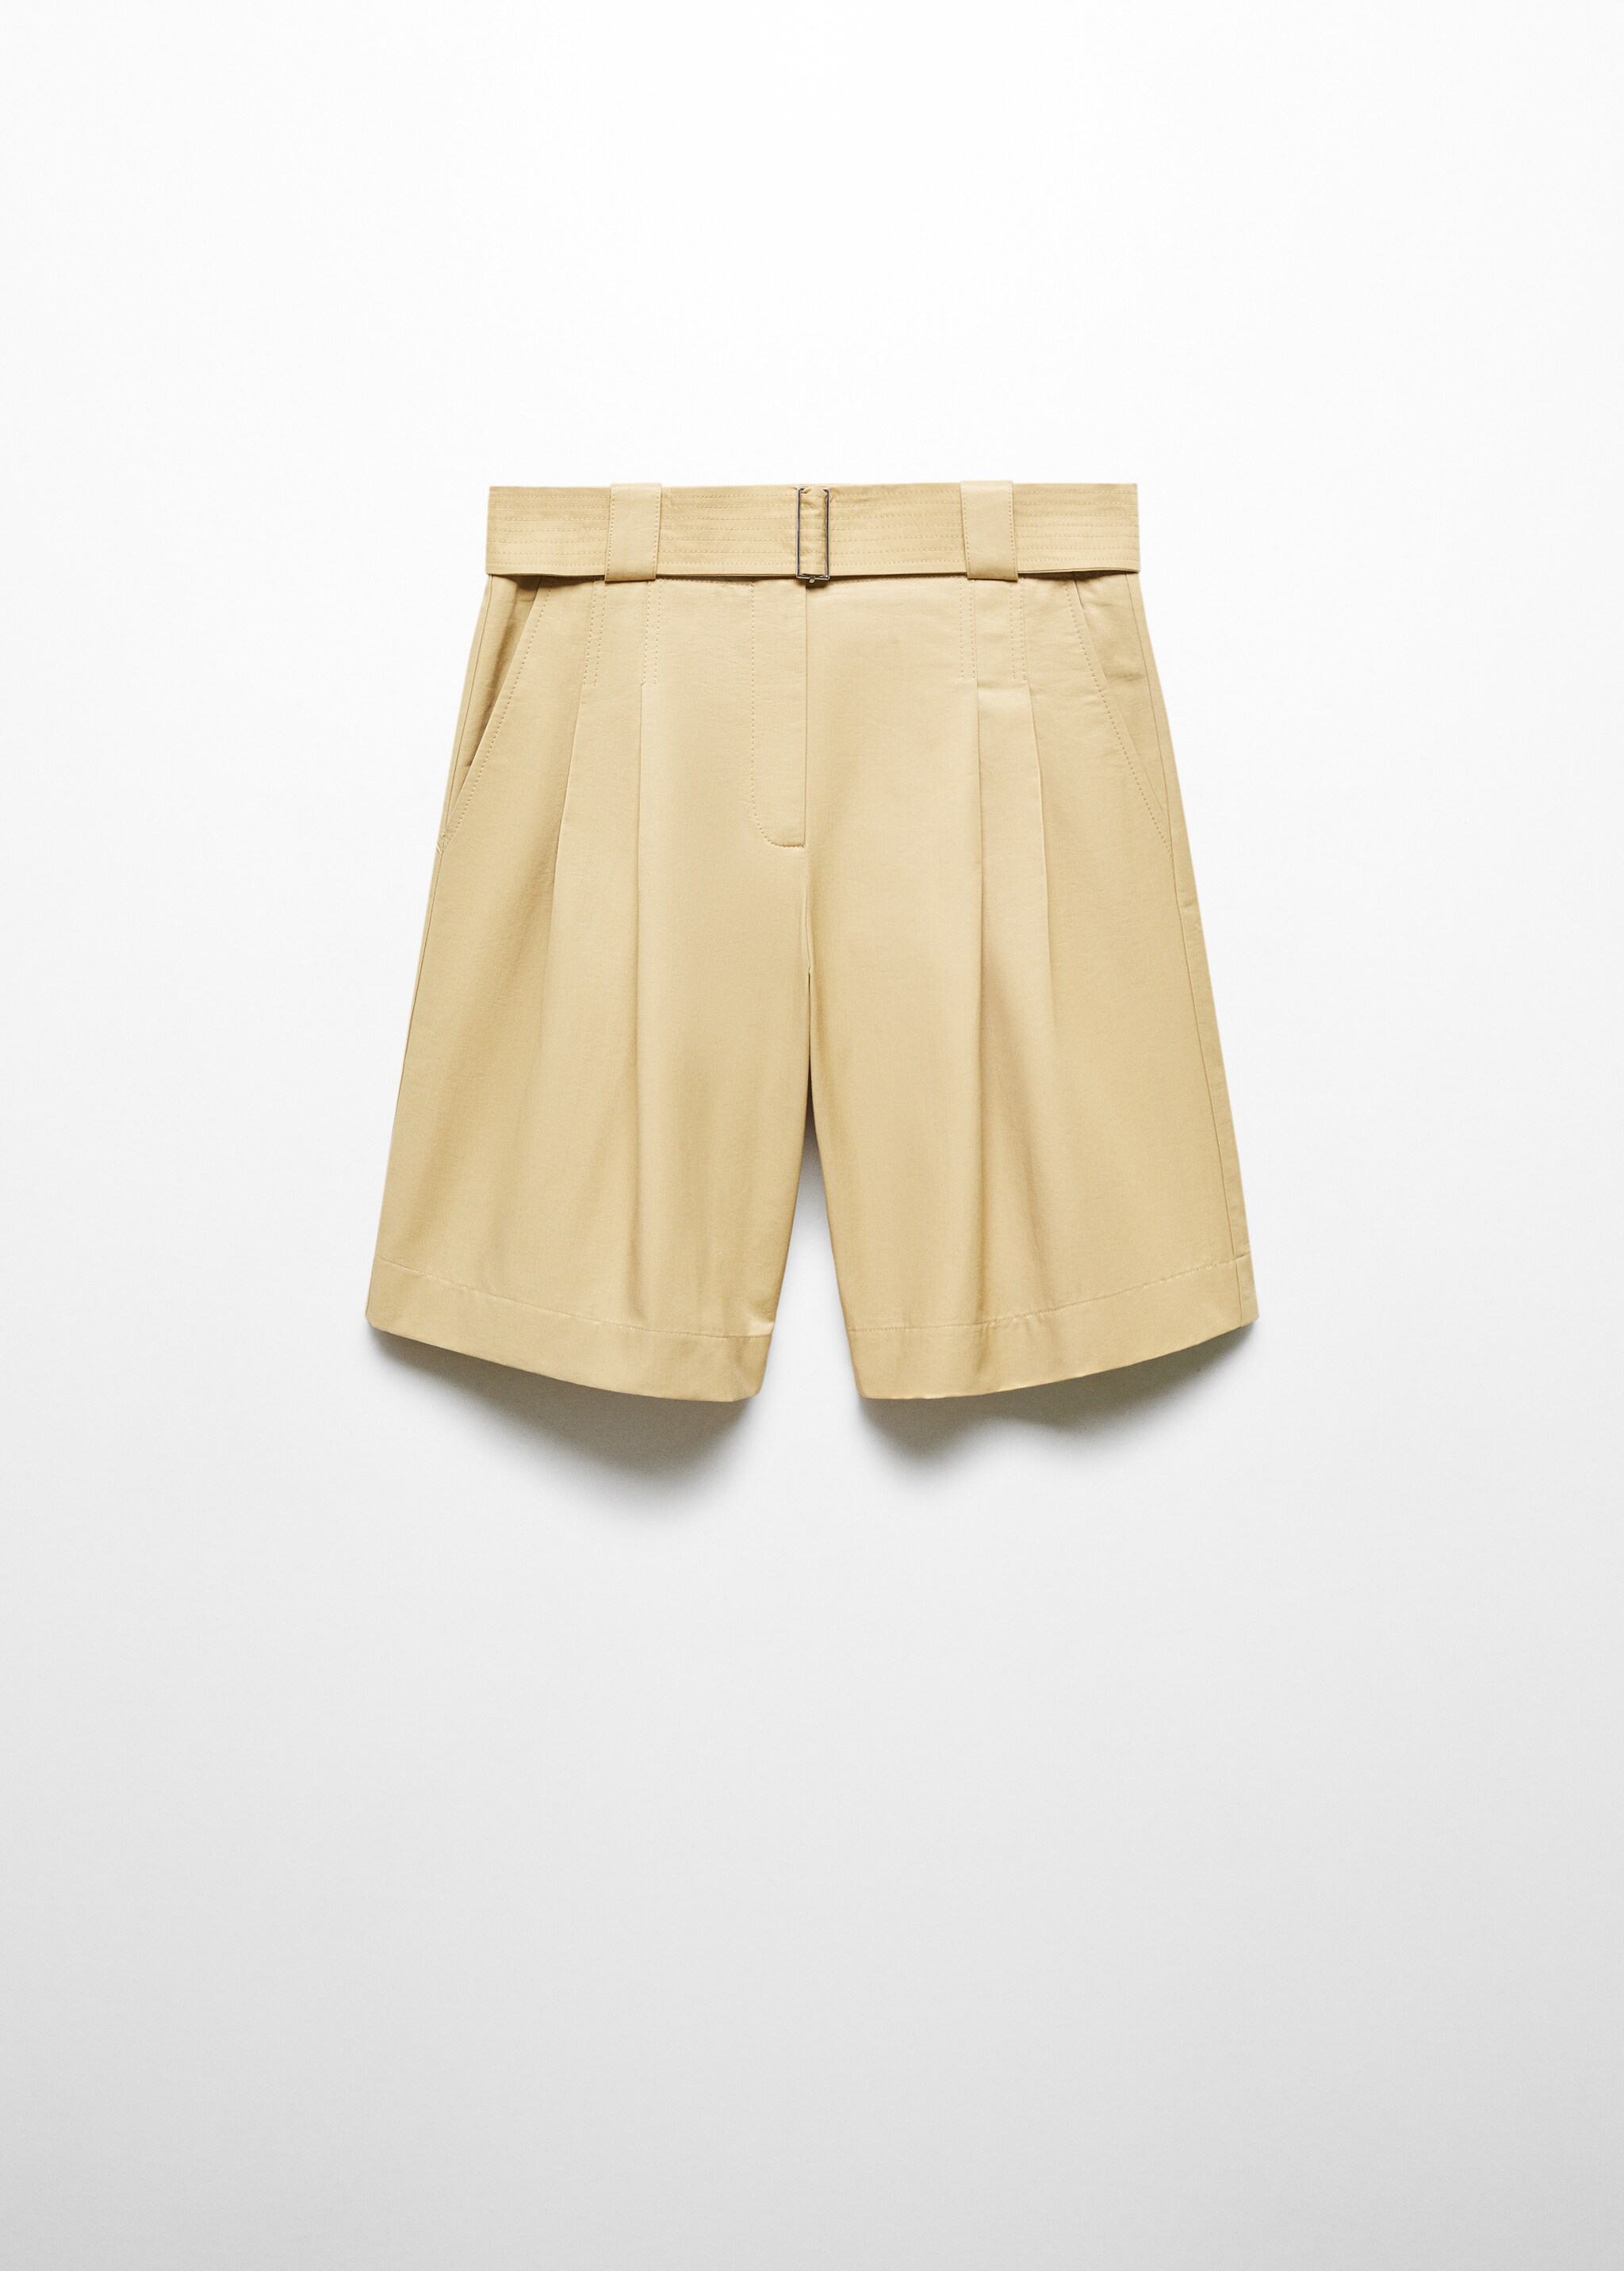 Cotton pleated Bermuda shorts - Article without model